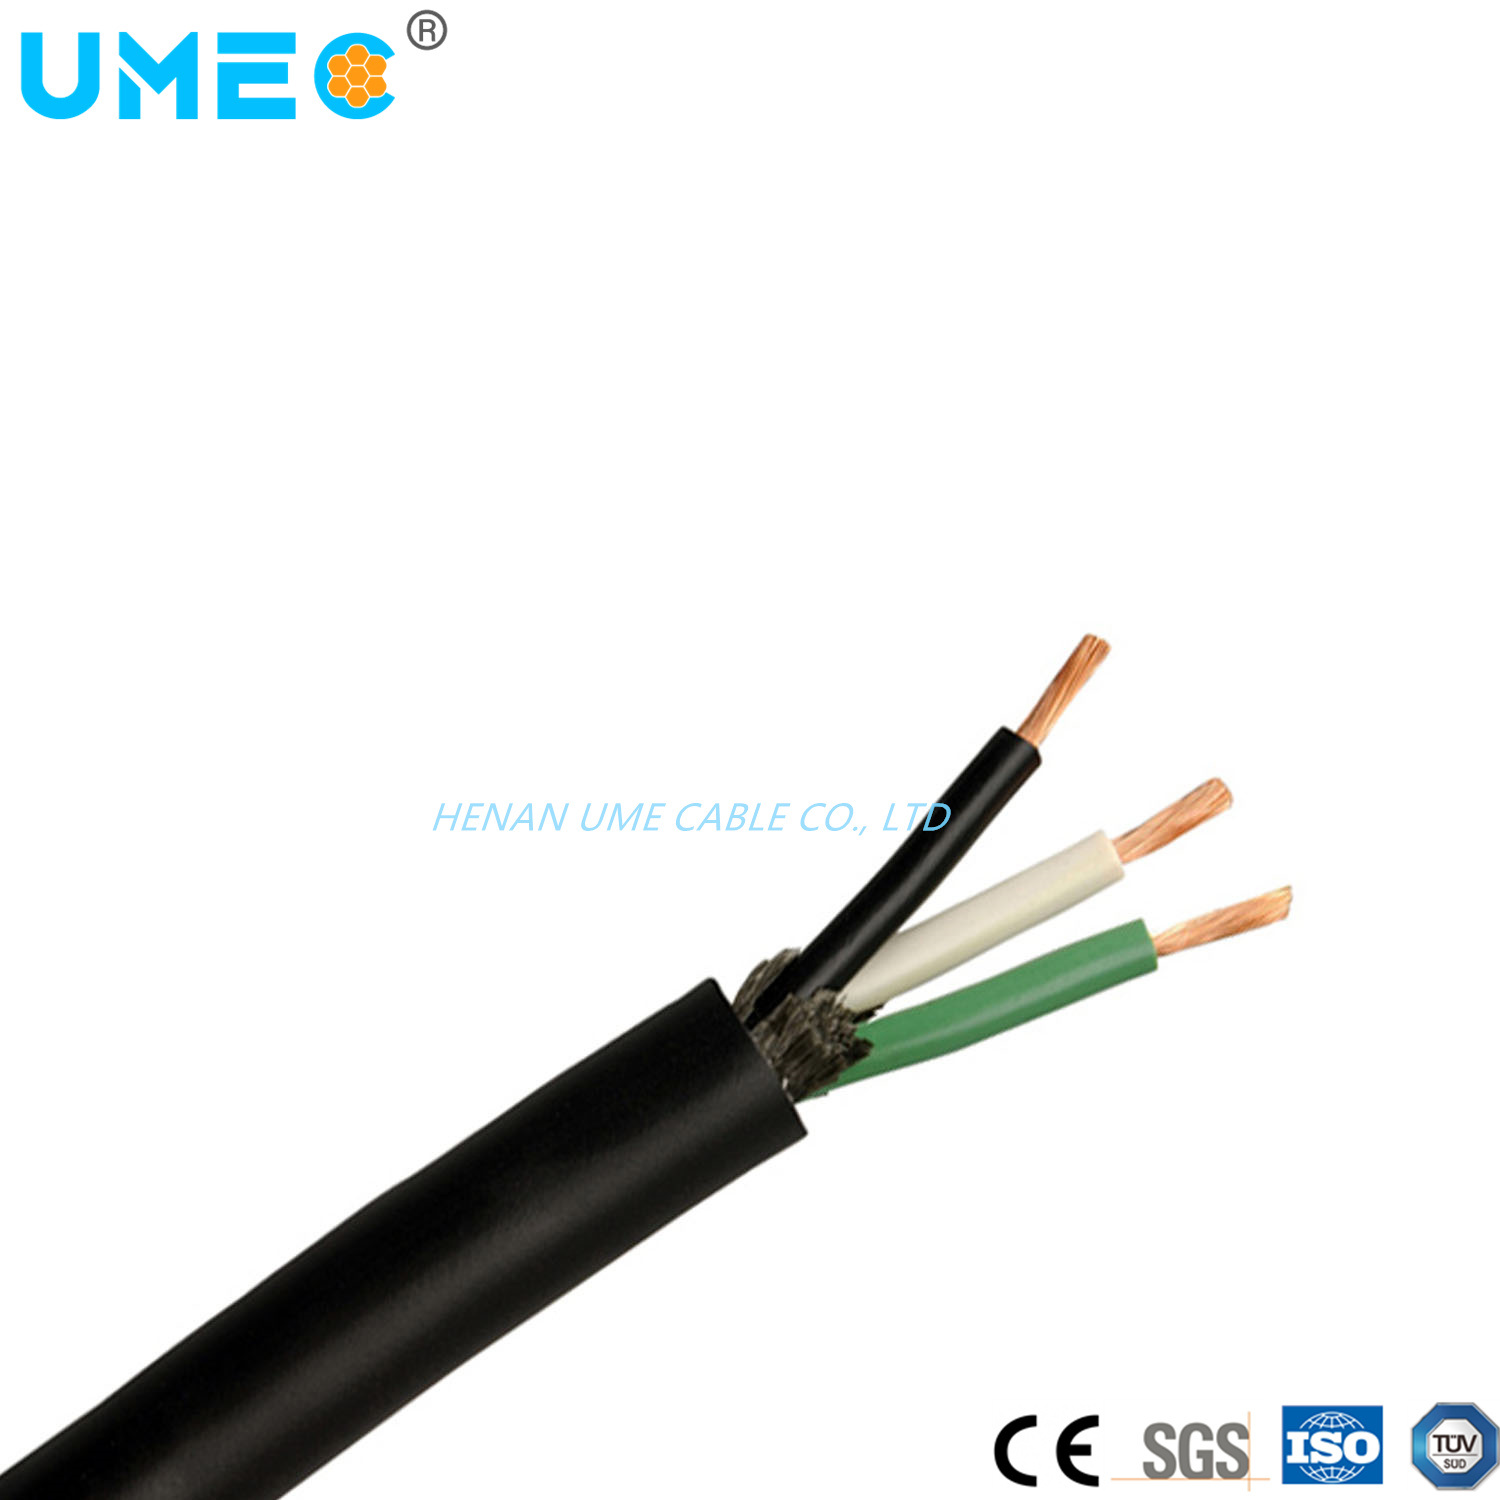 
                Soow Sjoow Flexible Rubber Cable 600V Us Best Selling 3X18AWG 3X16AWG 3X14AWG 3X12AWG 3X10AWG Factory Price
            